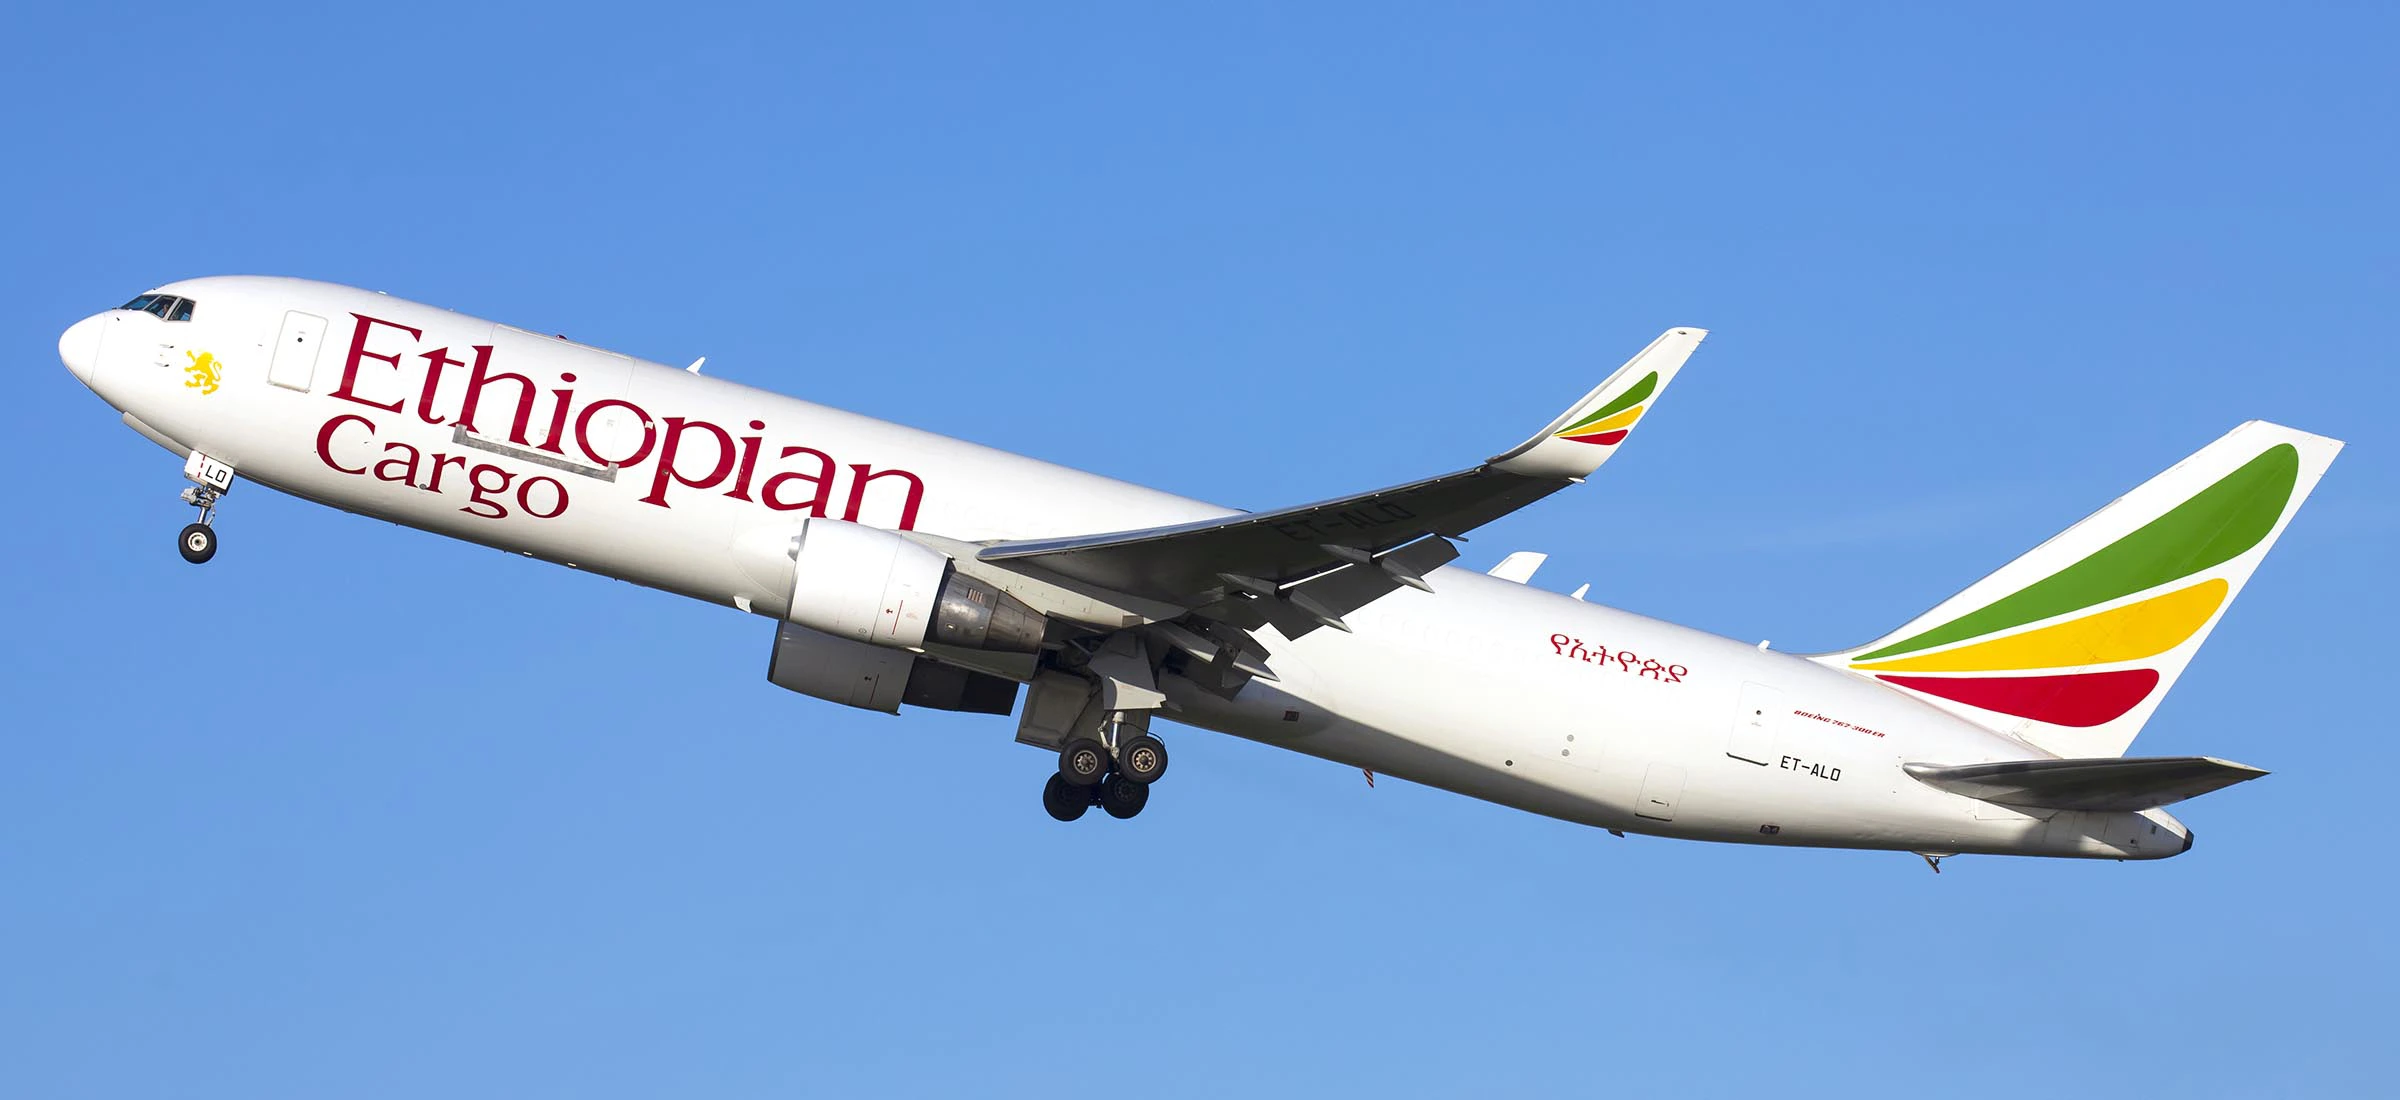 Ethiopian Airlines Launches Cargo Flight to Addis Ababa